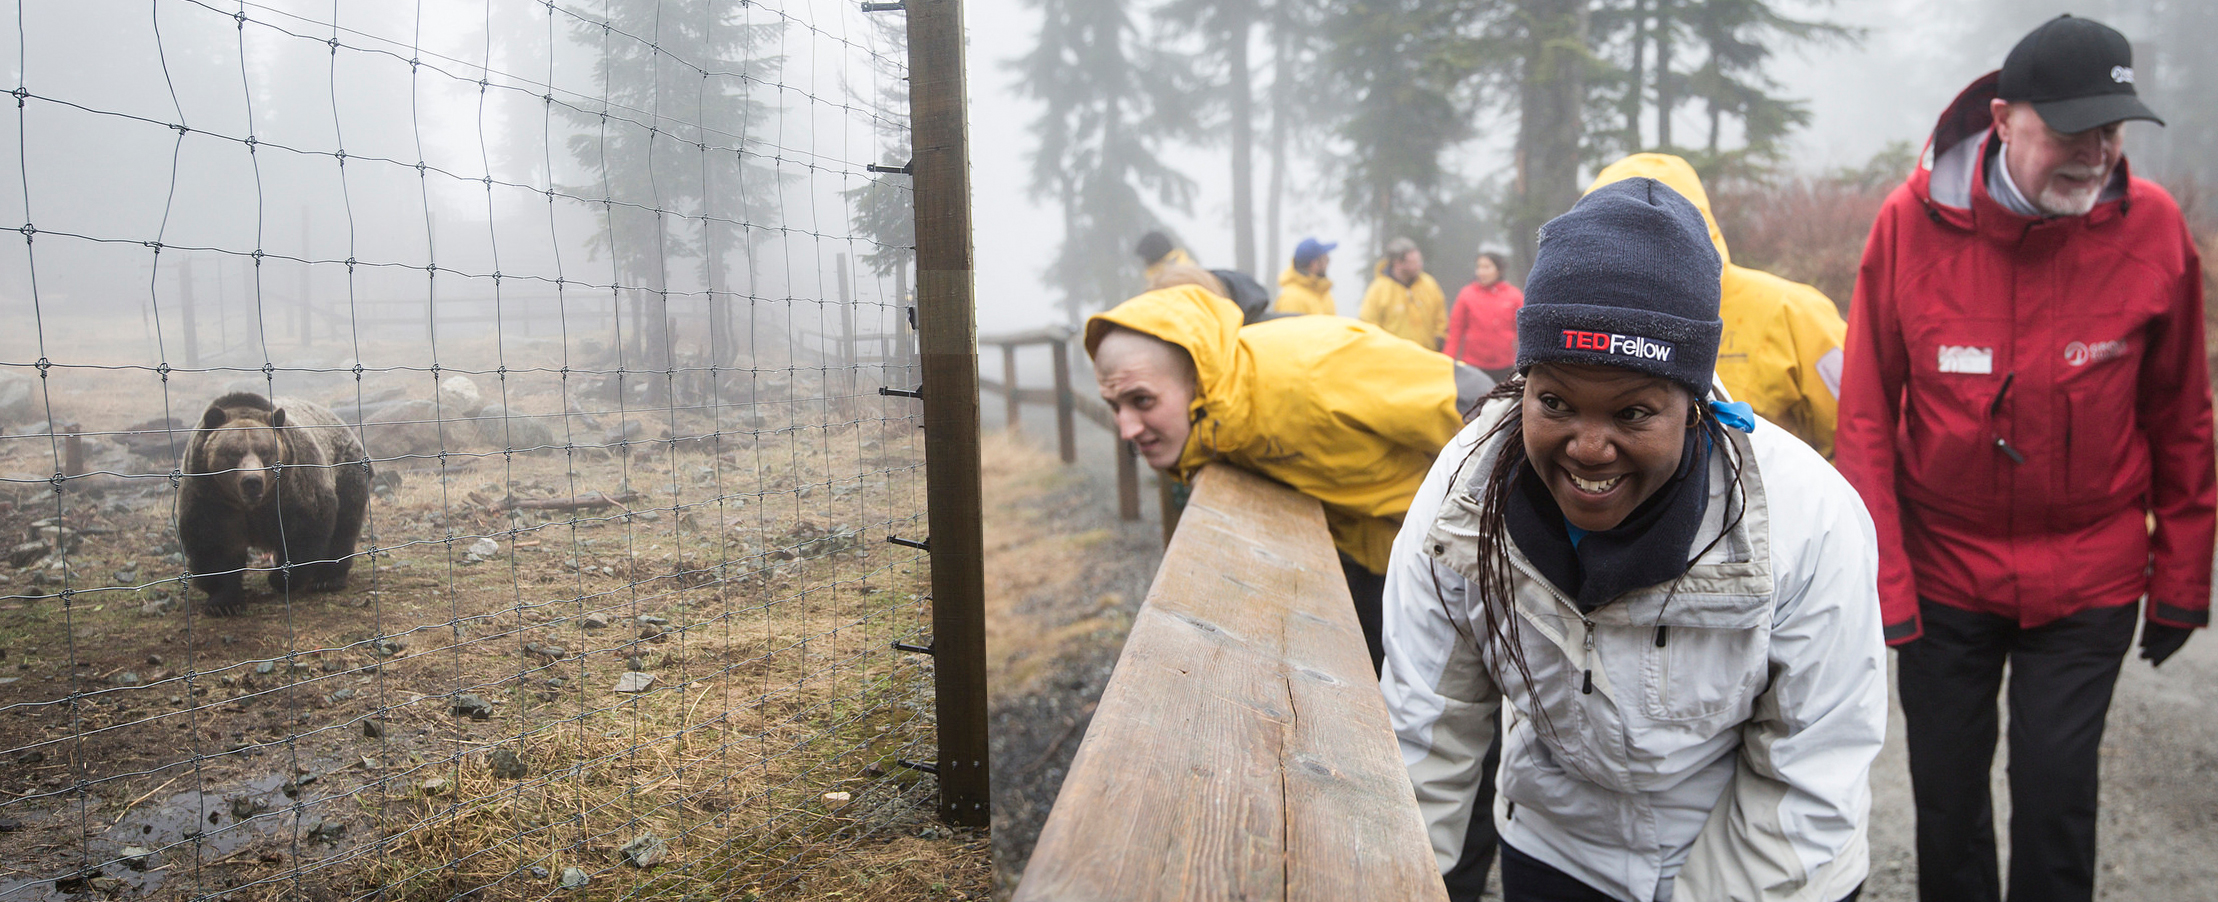 As the TED Fellows explore Grouse Mountain, they spot a bear. Photo: Ryan Lash/TED